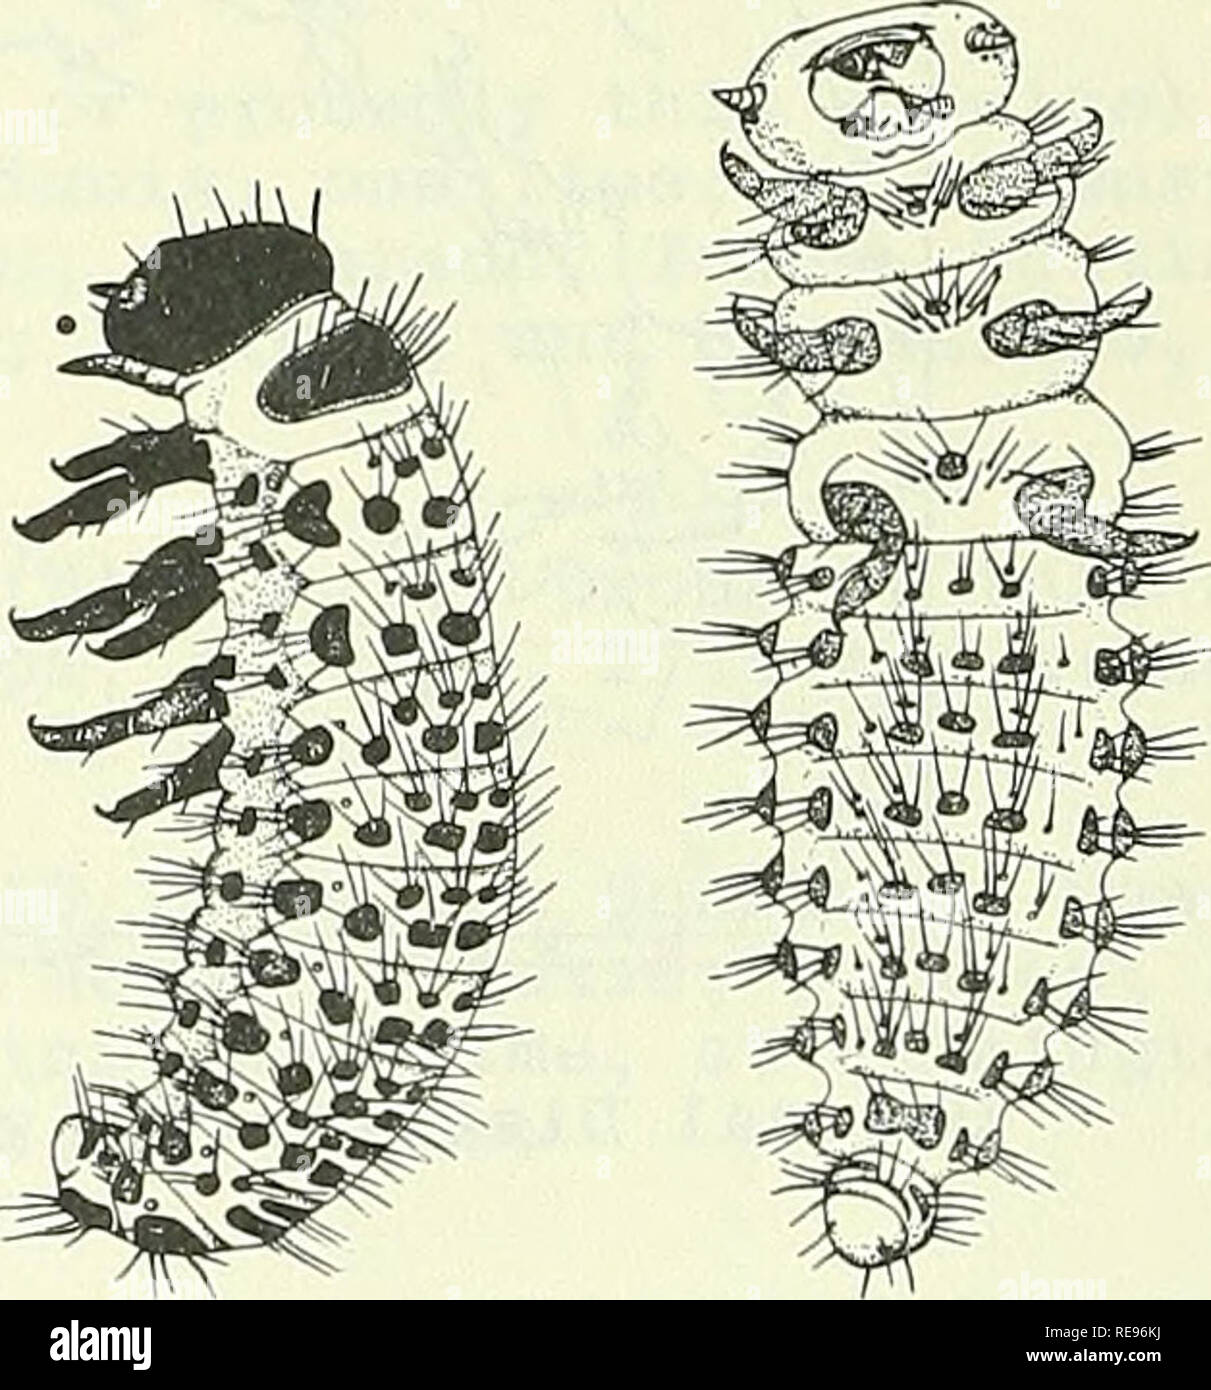 . Cooperative economic insect report. Beneficial insects; Insect pests. Adult of Phytodecta fornicatus Briiggem. Larva of Phytodecta fornicatus Briiggem. (Lateral and Ventral Views) Major references: 1. Knechtel, W. and Hrisafi, C. 1939. In VII Internatl. Kong. f. Entomologie, Verhand. Band 4:2533-2543. In Ger. 2. Statelov, N. 1936. Minist. Landw. Staatsdom Pub. No. 63, 44 pp., Sofia. In Bulg. 3. Vukasovic, P. 1937. Arch. Minist. Poloprivr, 4(7), (47 pp. in reprint). In Serbian. 4. Voukassovitch, H. and Voukassovitch, P. 1930. Rev. de Path. Veget. et d'Ent. Agr. 17(10):413-418. 5. Weise, J. 19 Stock Photo